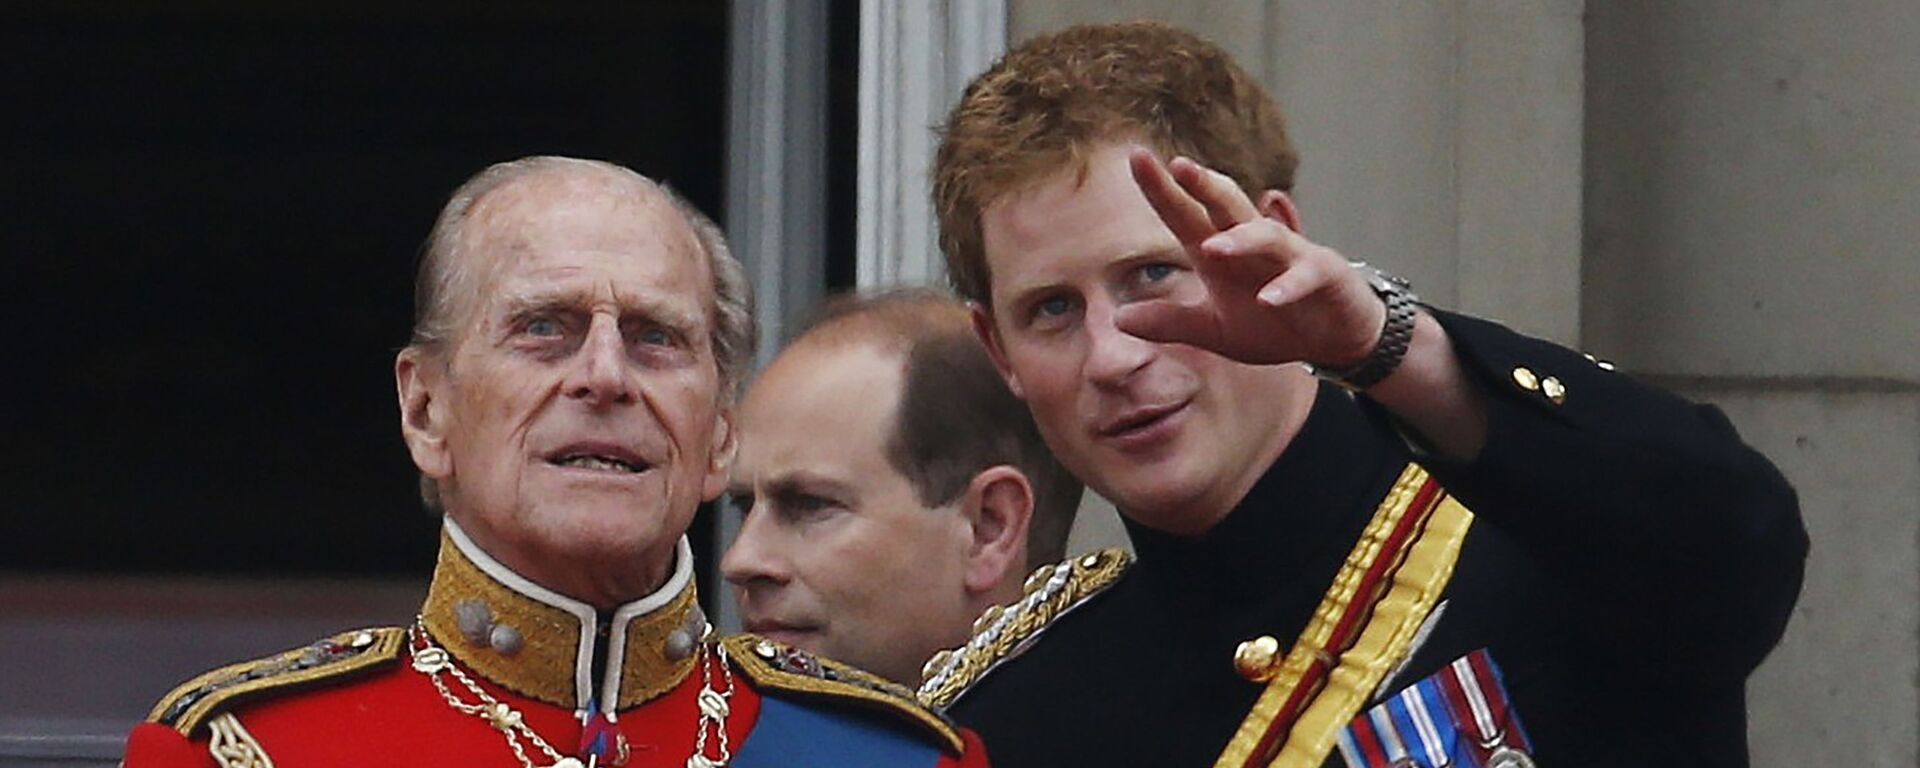 In this 14 June 2014 file photo, Britain's Prince Harry talks to Prince Philip as members of the Royal family appear on the balcony of Buckingham Palace, during the Trooping The Colour parade, in central London - Sputnik International, 1920, 12.04.2021